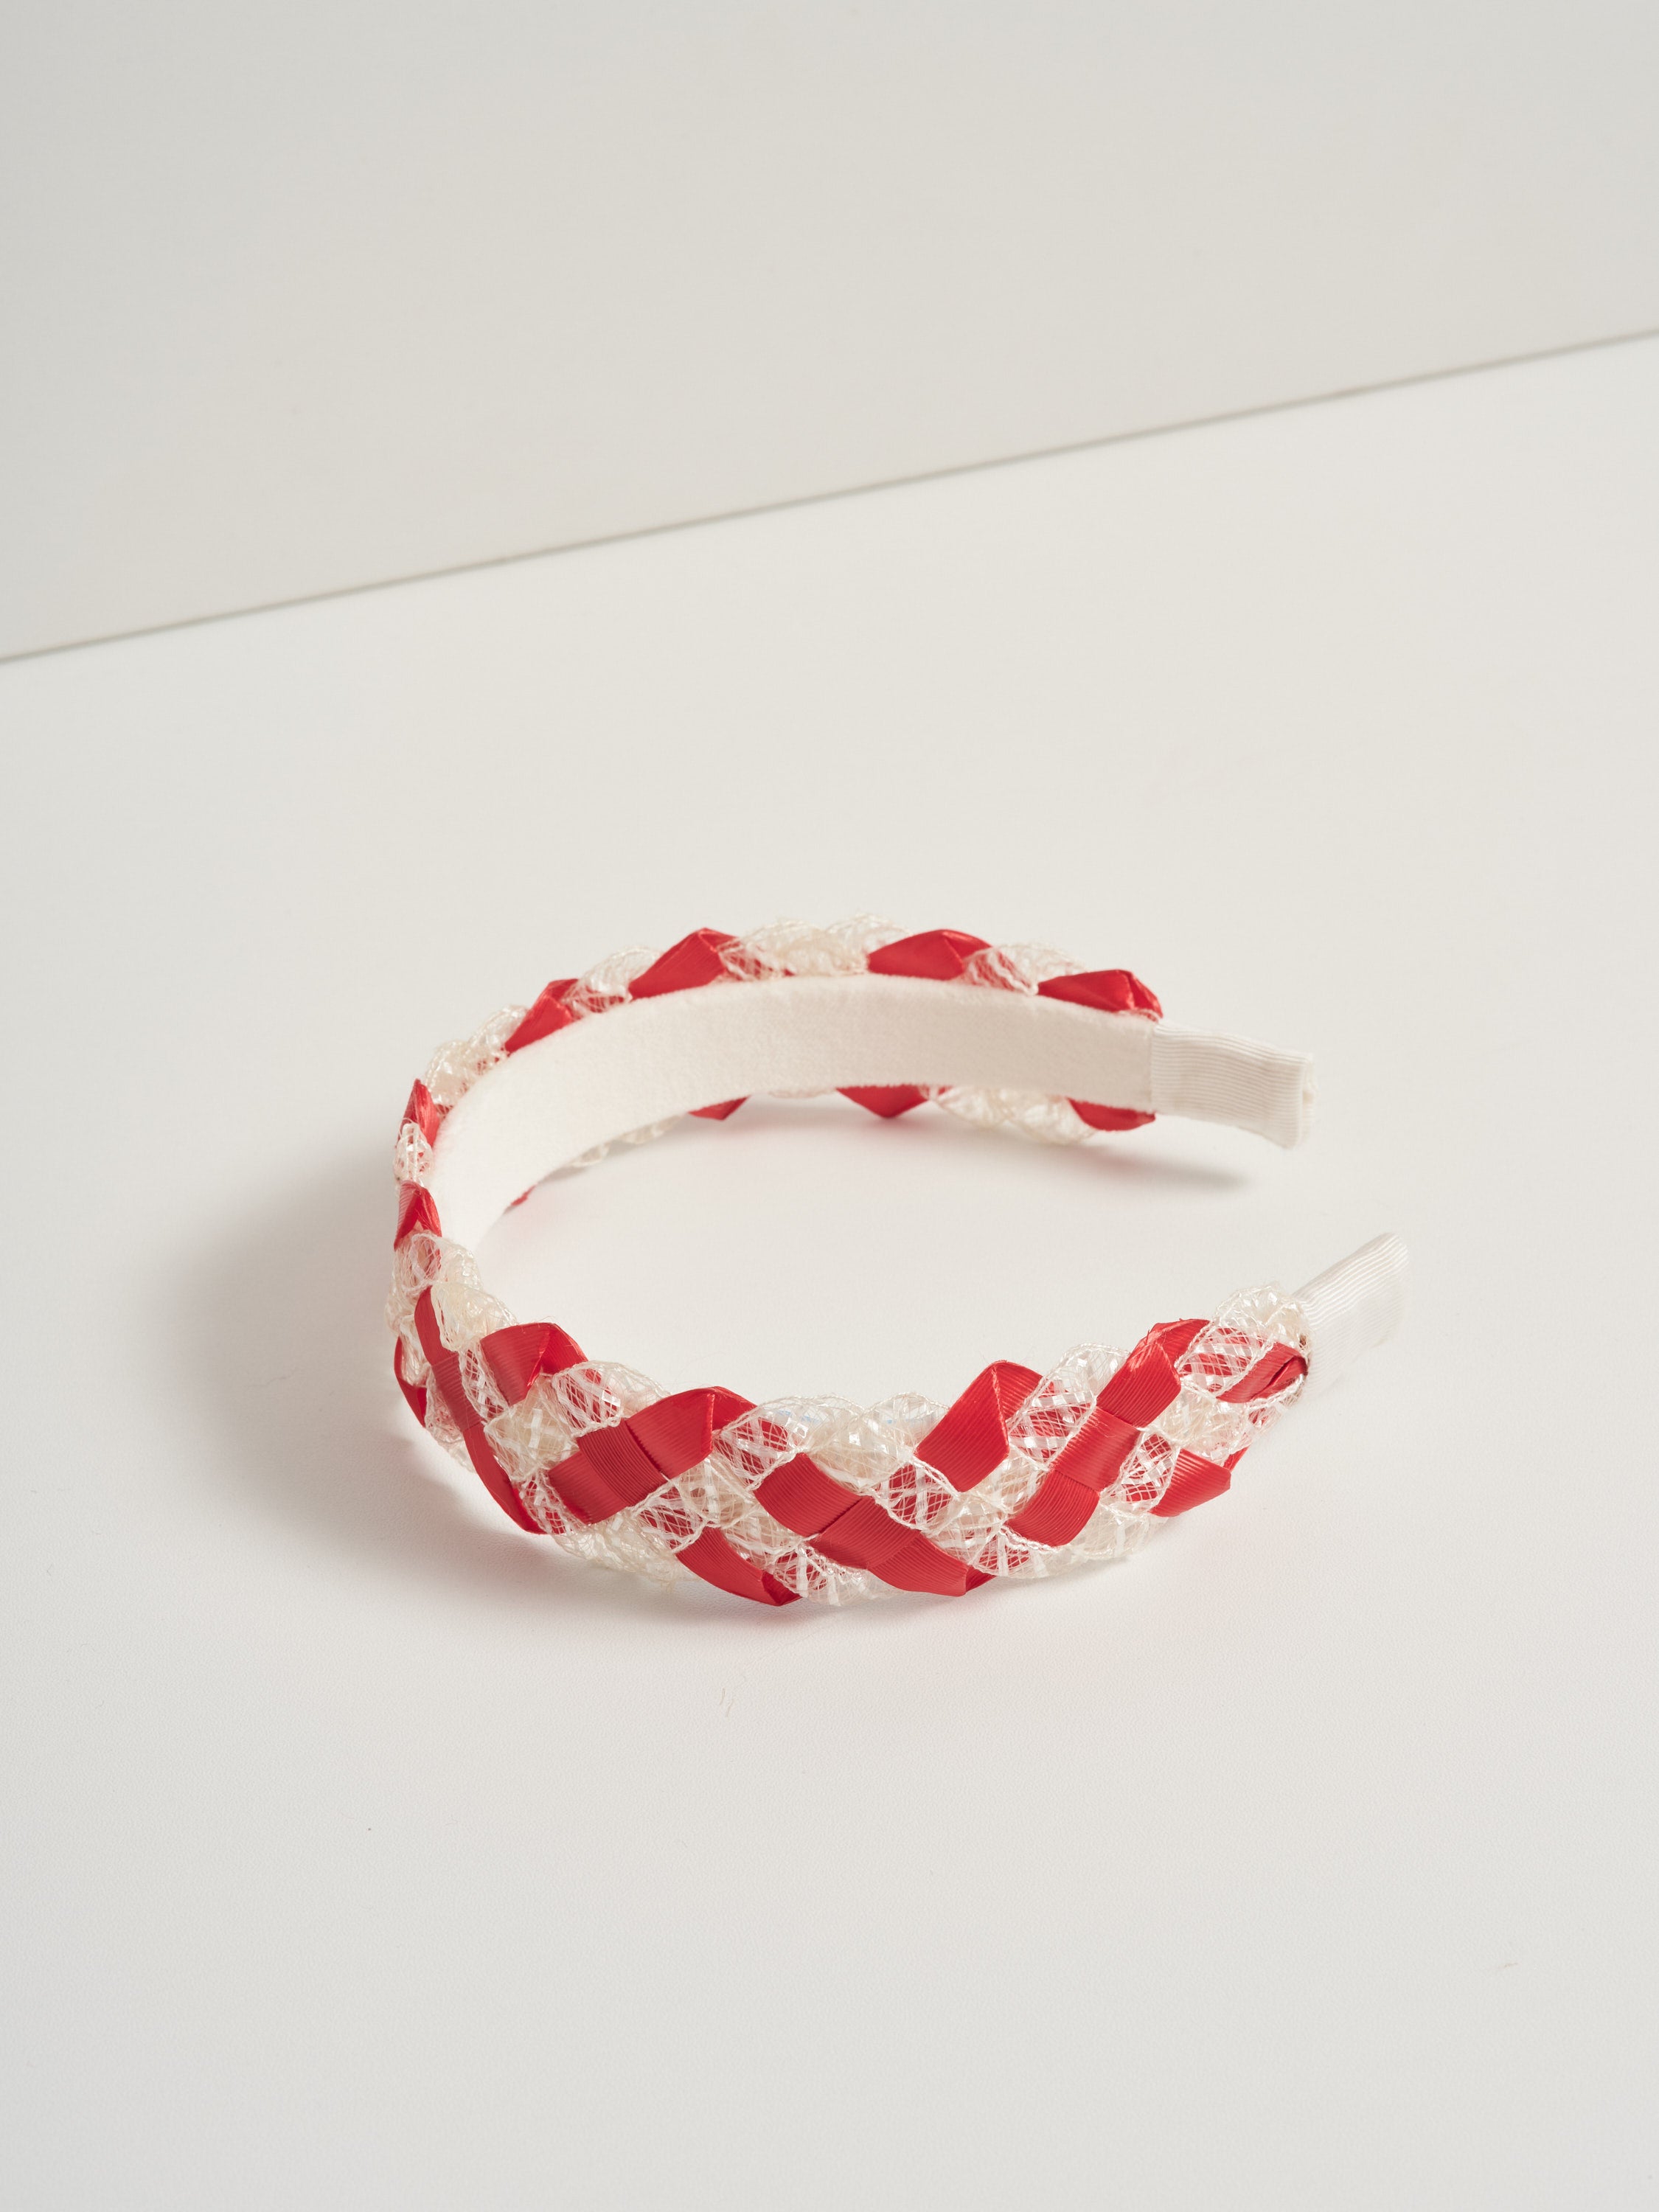 Entwine vintage straw headband - Red and white